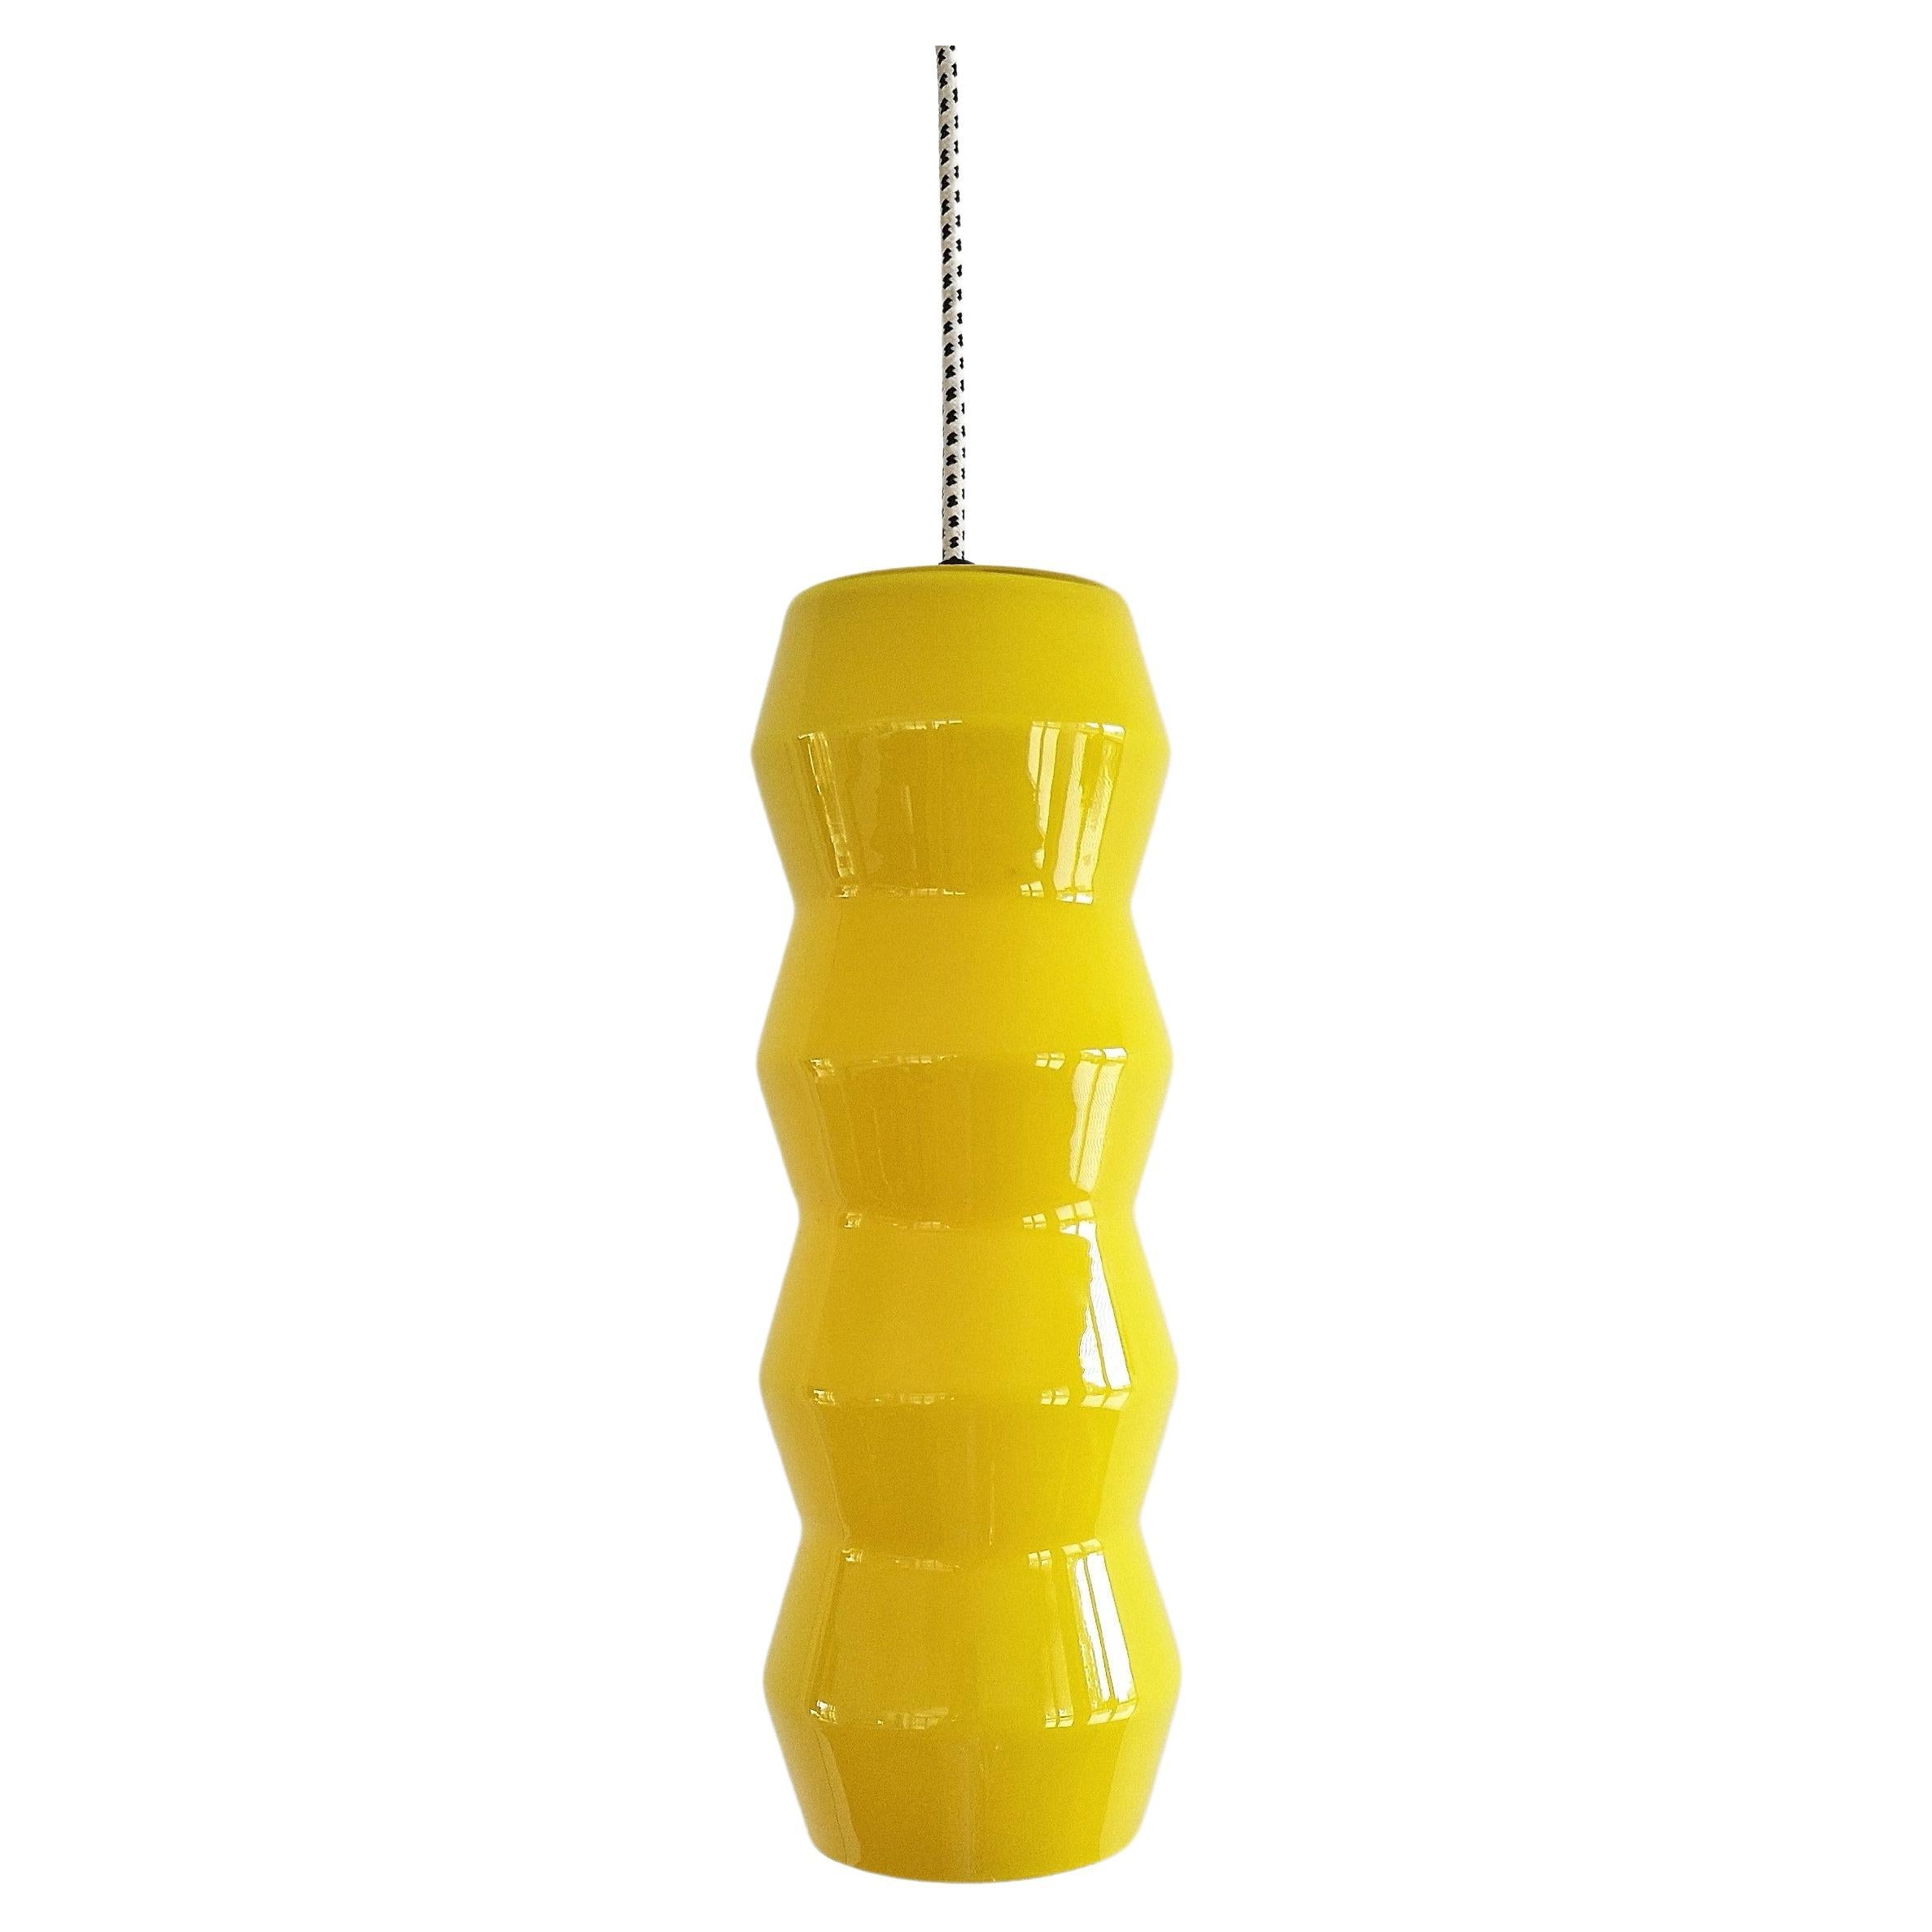 Yellow Murano Glass Pendant Lamp, Sweden 1960s, 2 Available